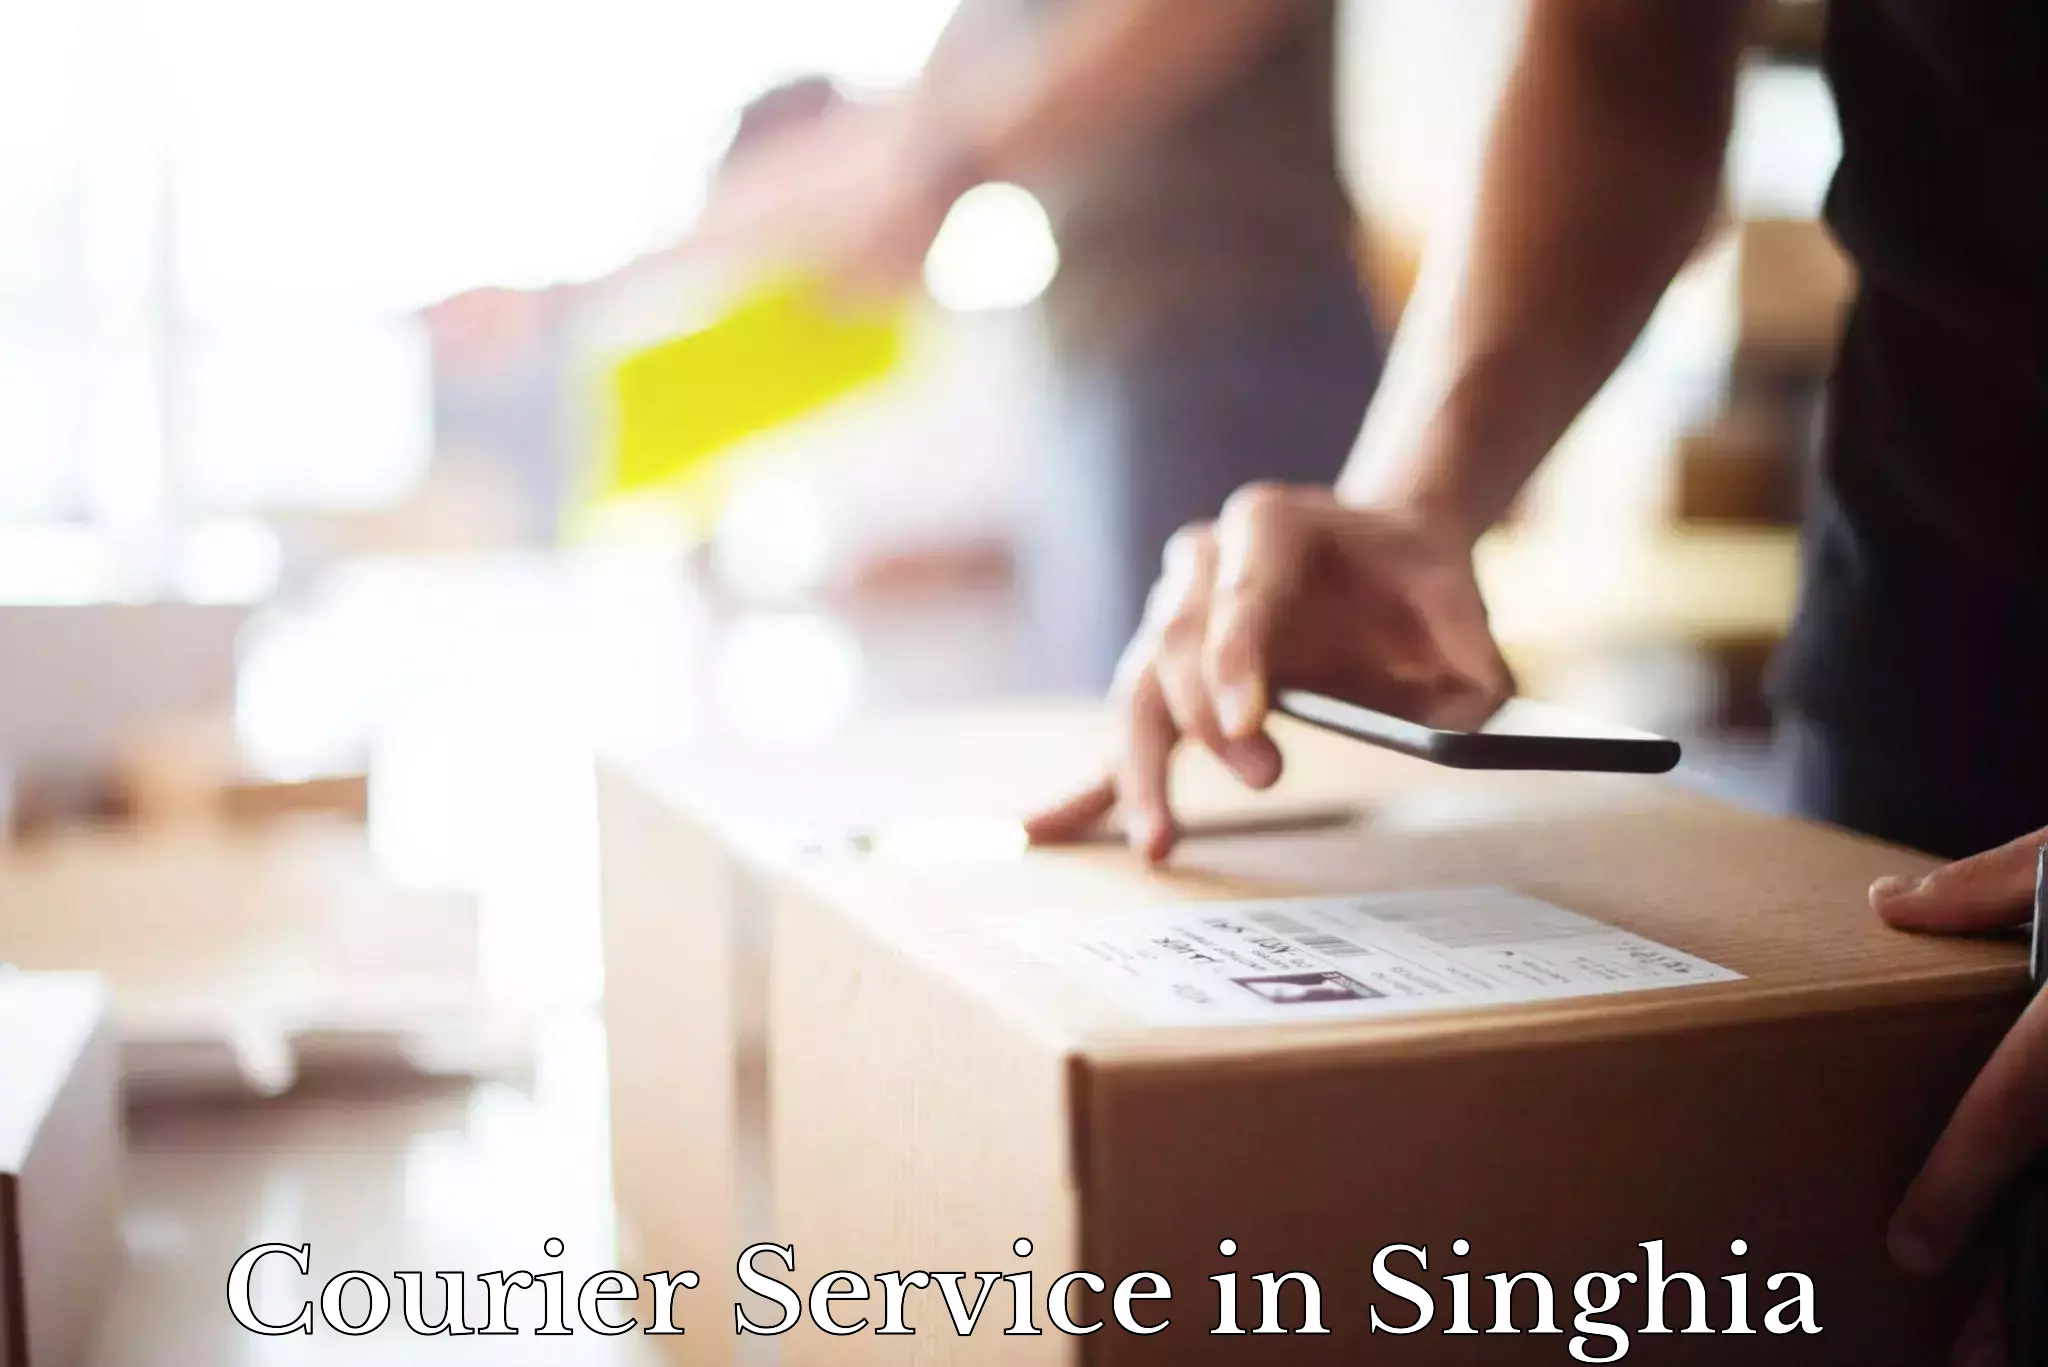 Same-day delivery solutions in Singhia